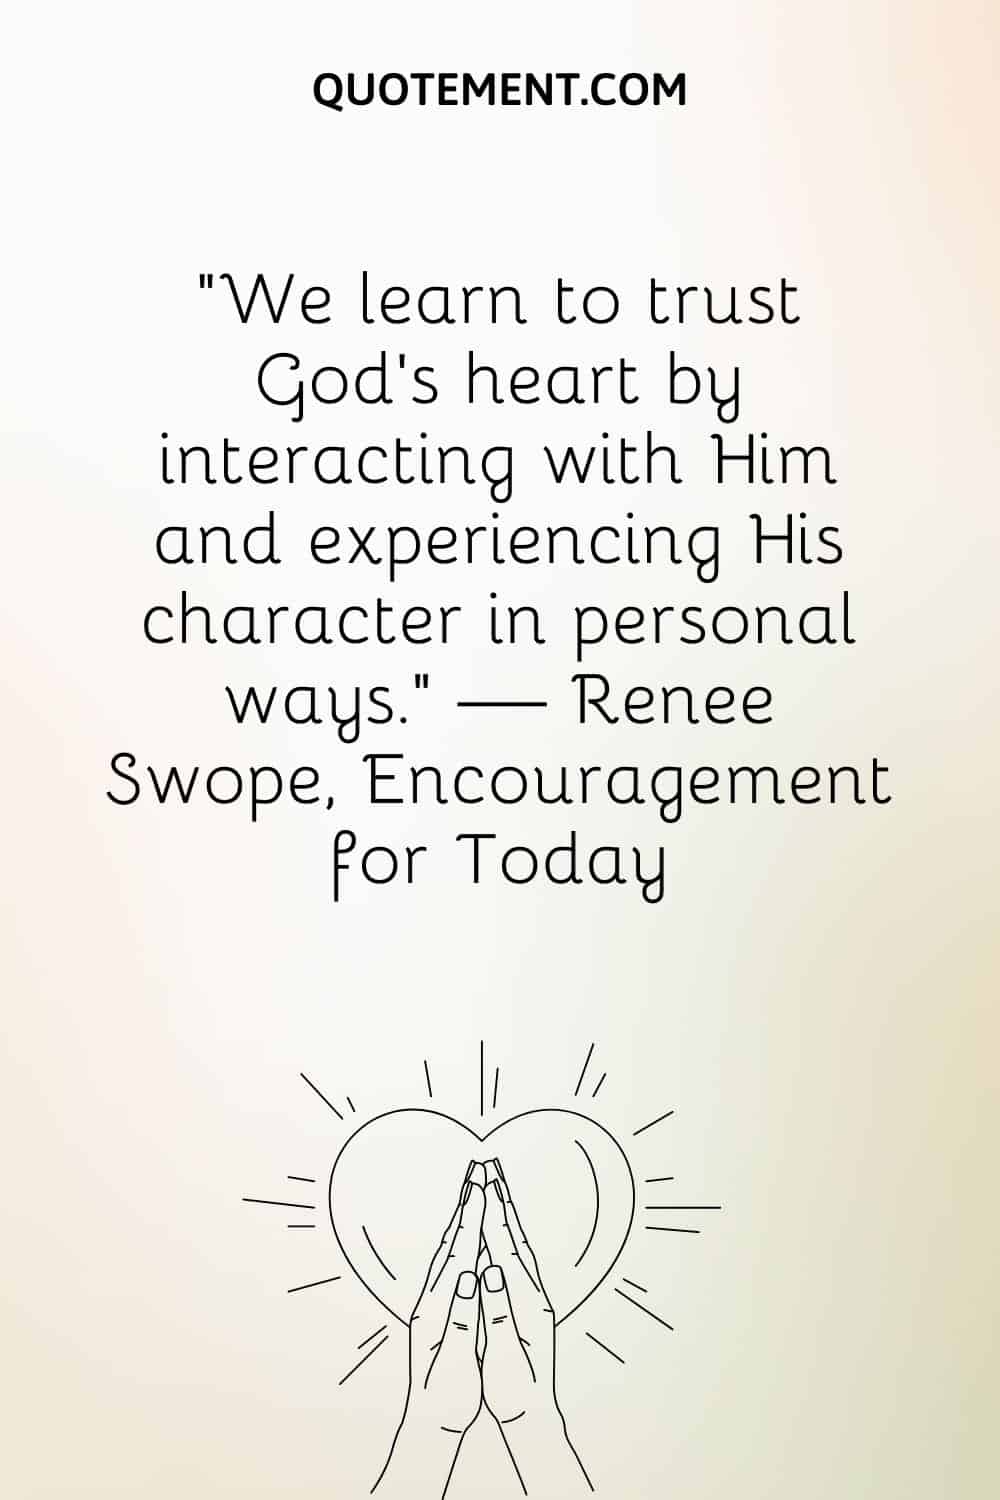 We learn to trust God's heart by interacting with Him and experiencing His character in personal ways